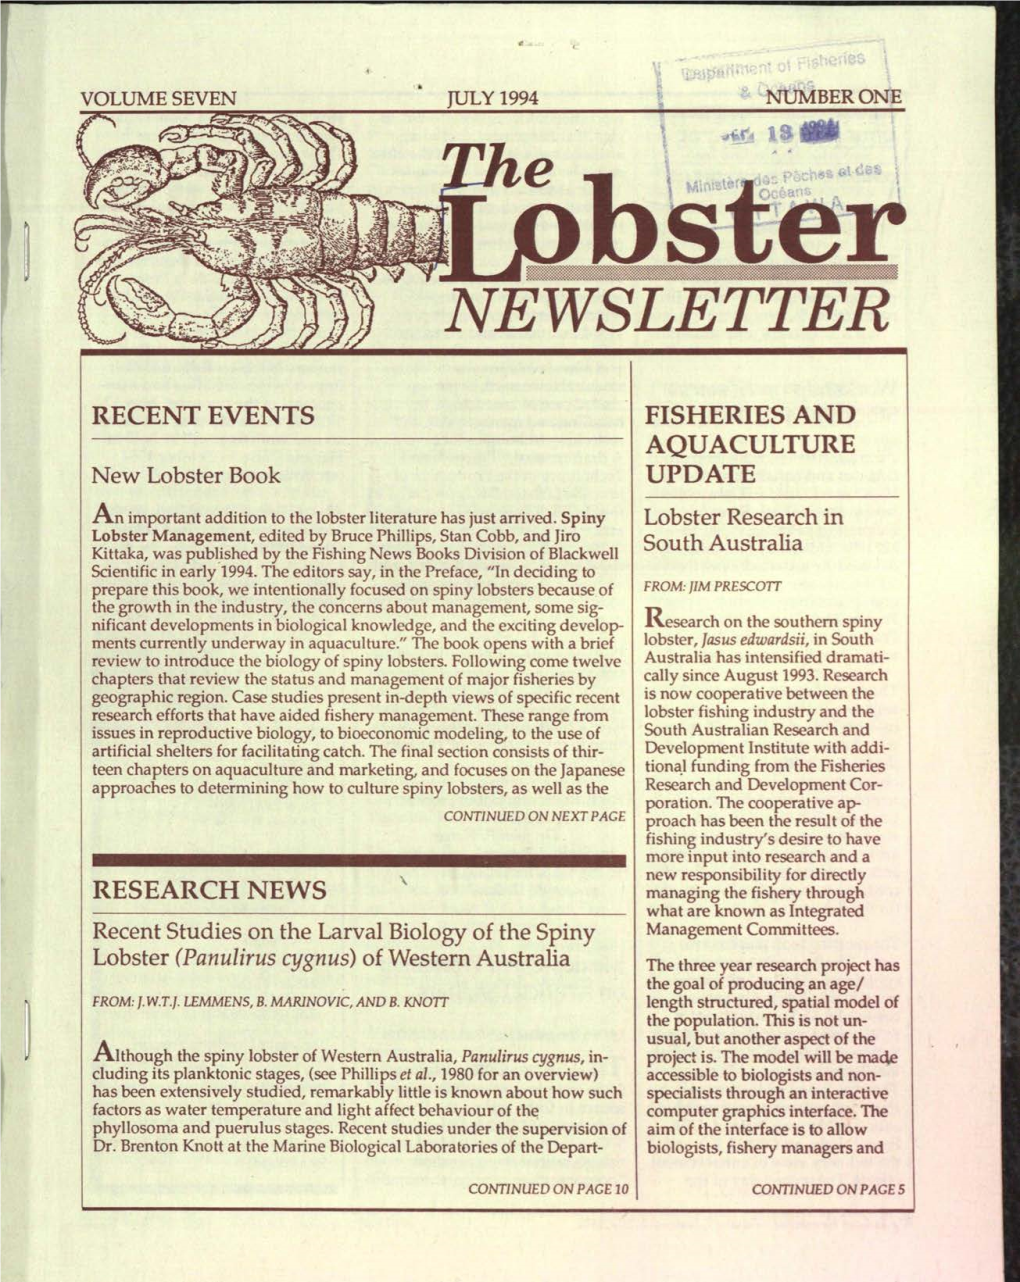 The Lobster Newsletter July 1994